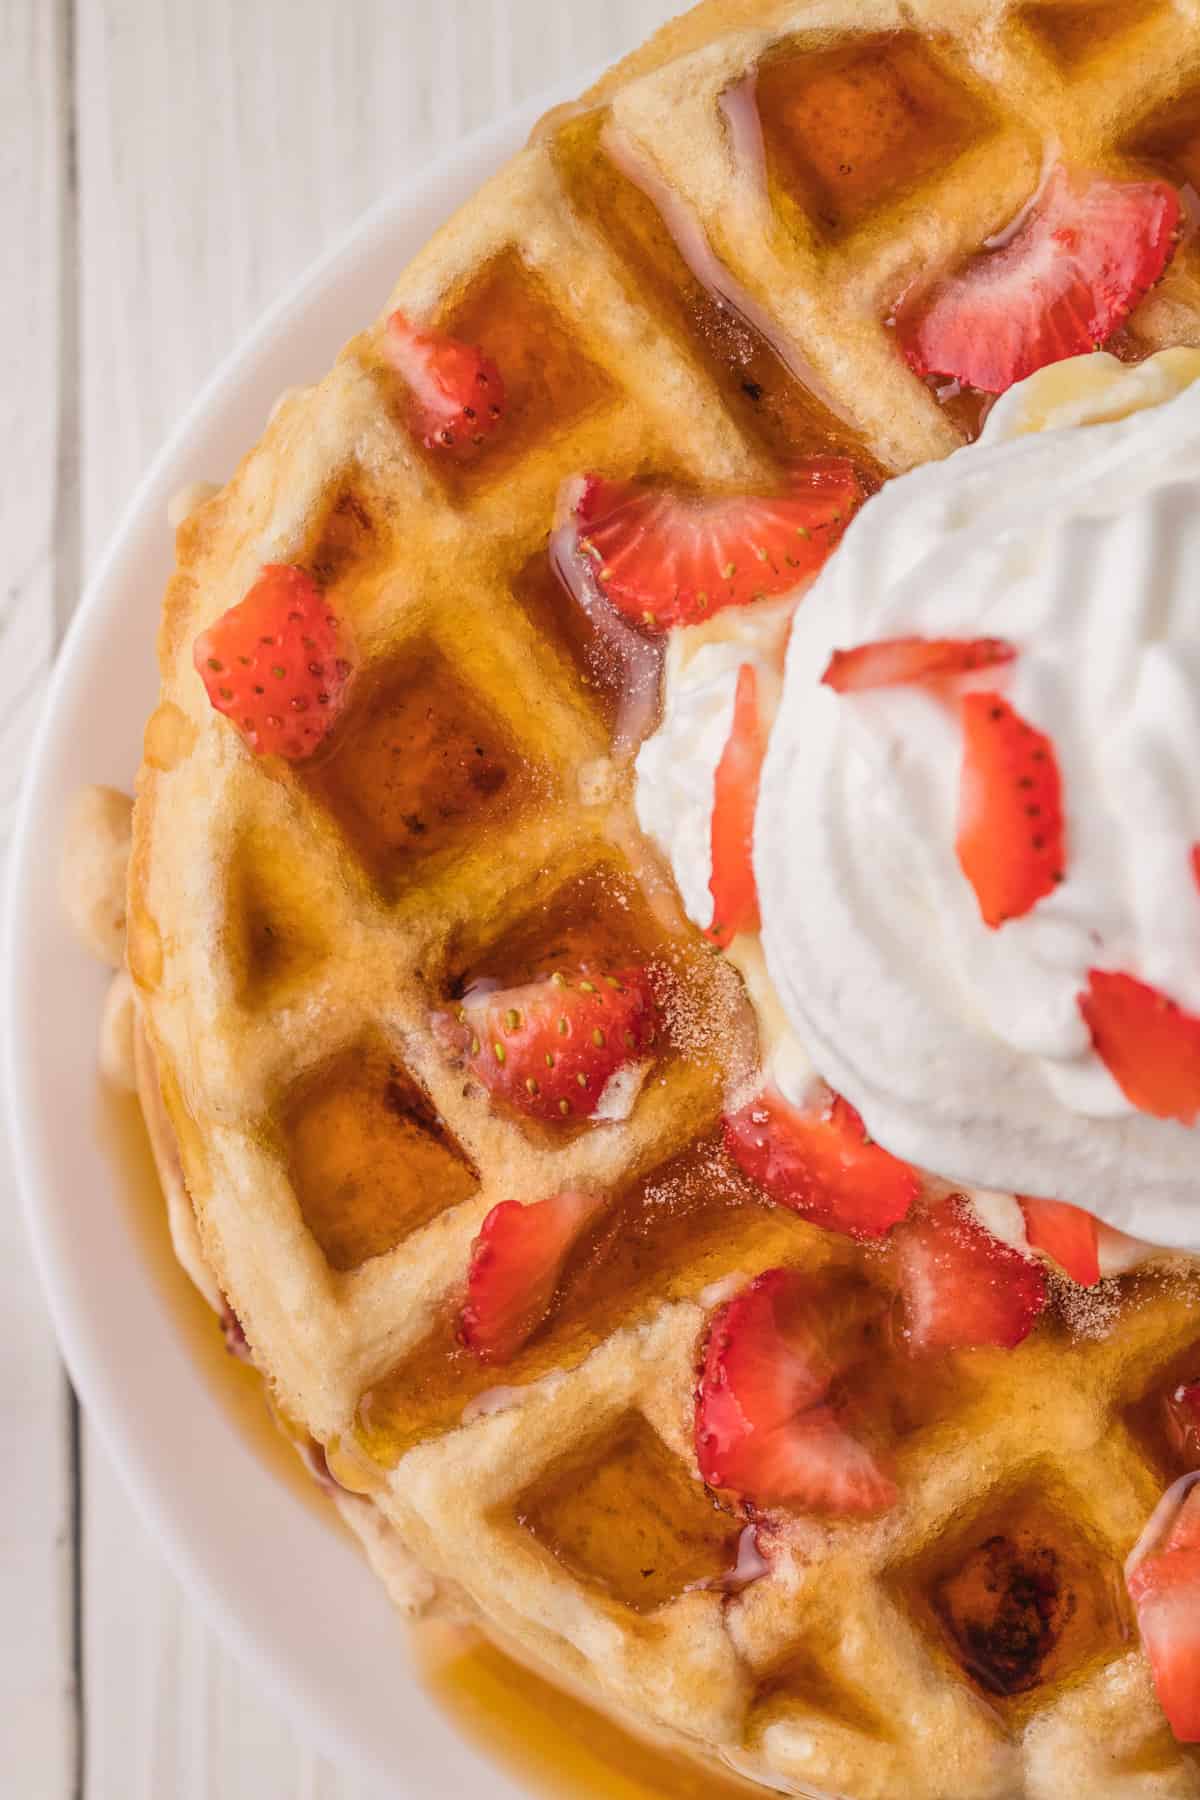 Overhead view of strawberry waffle.